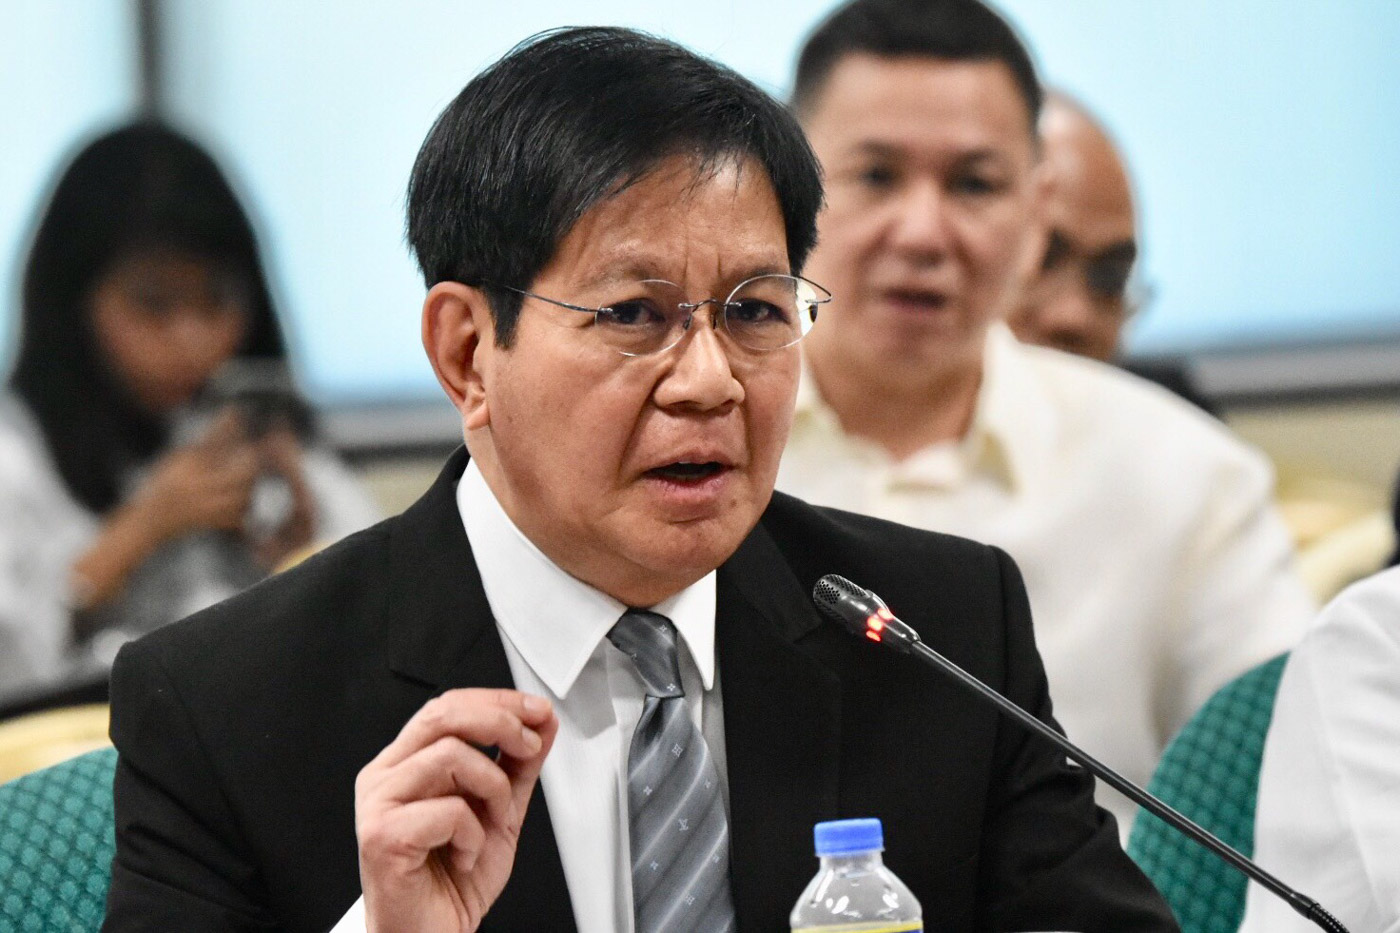 A COLONY? Senator Panfilo Lacson questions the landing of a Chinese military plane in the Philippines. File photo by Angie de Silva/Rappler 